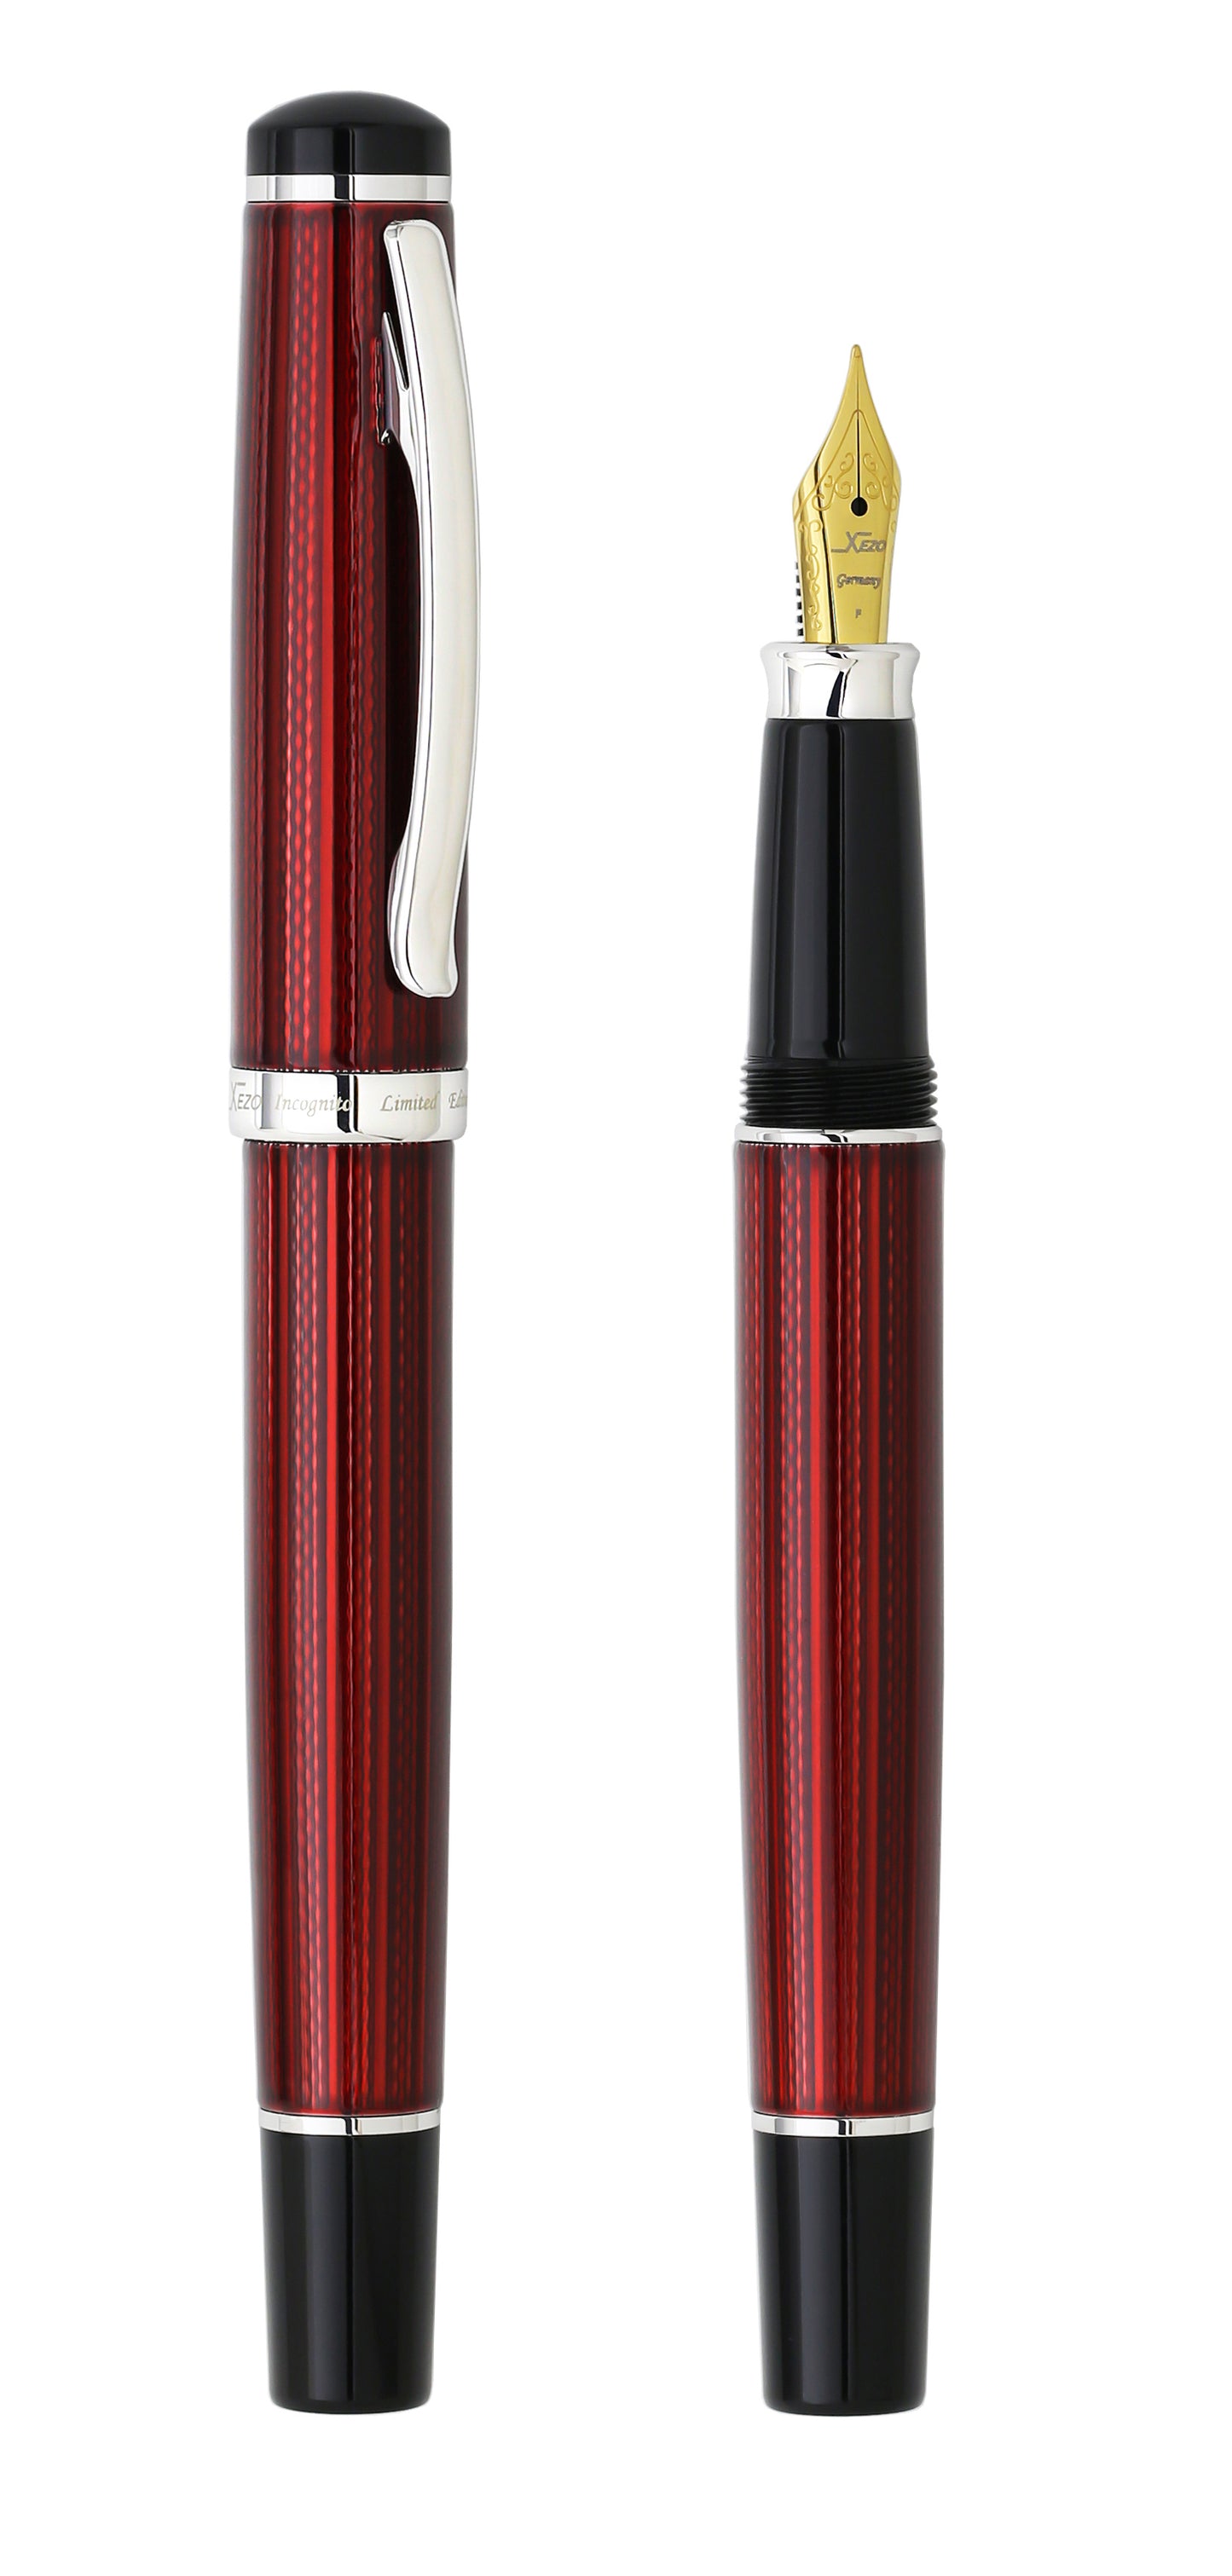 Xezo - Comparison between the angled view of the side of capped and uncapped Incognito Burgundy F-1 fountain pens